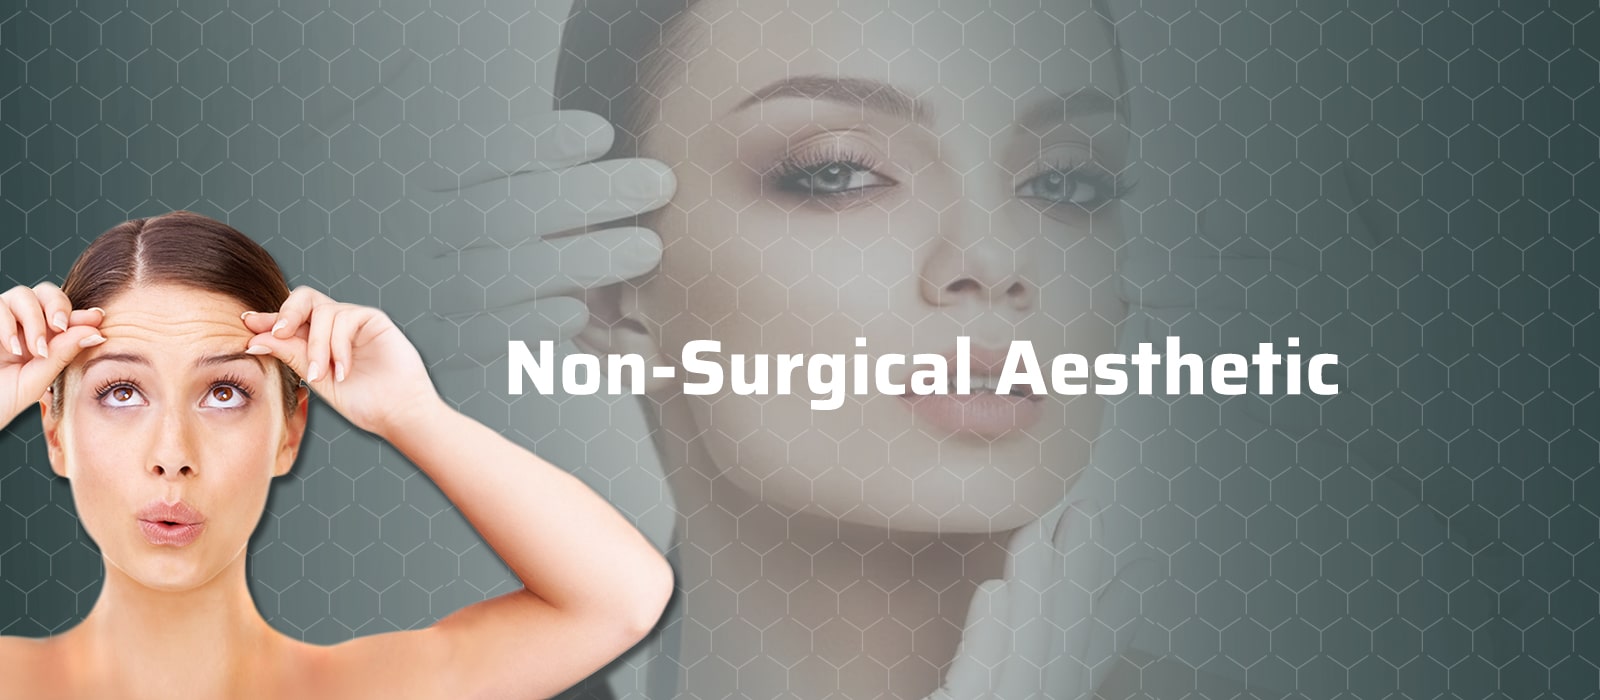 Non-Surgical Aesthetic